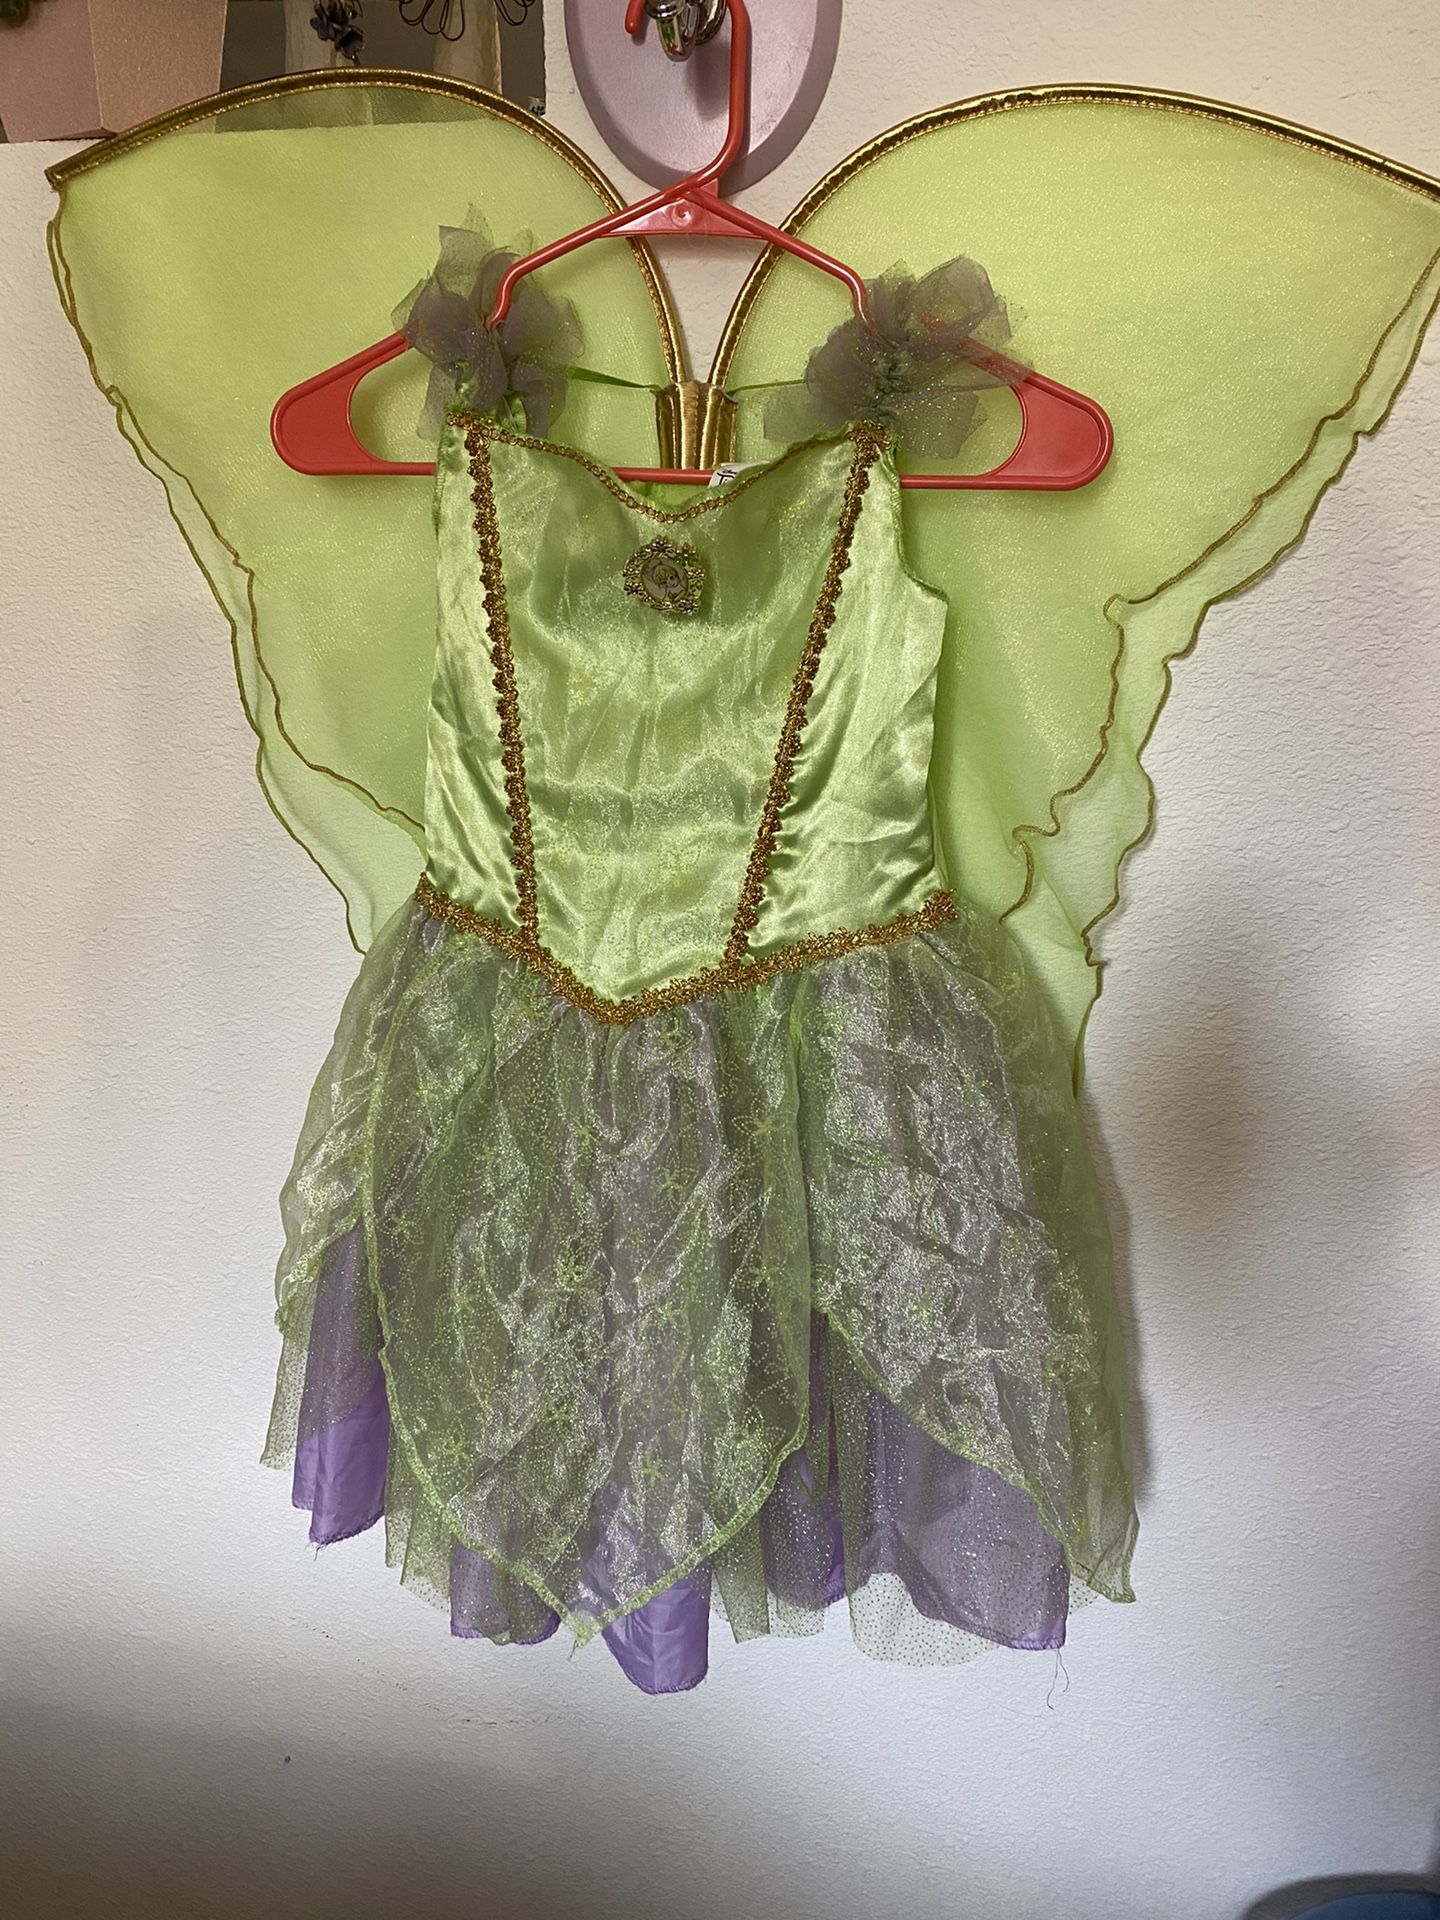 Tinkerbell costume with wings